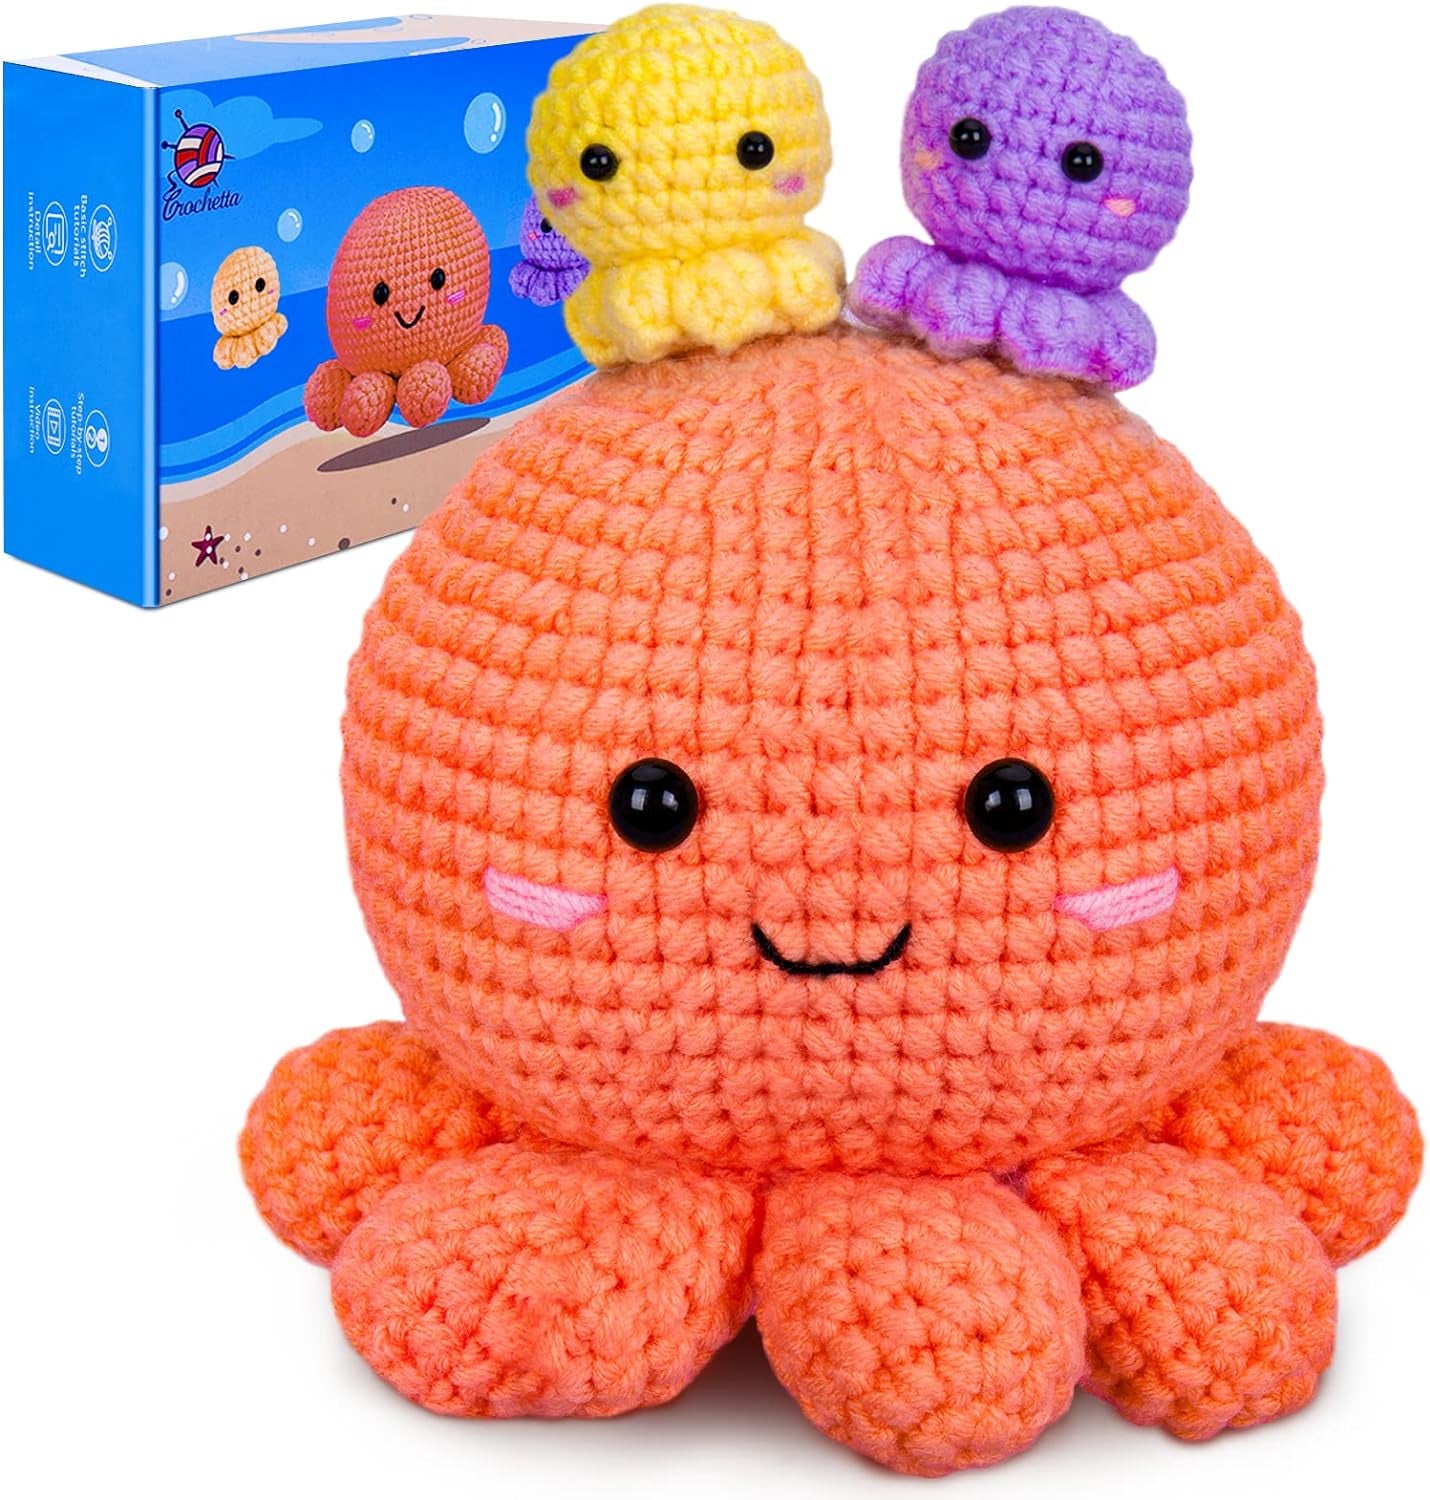 Crochet Kit for Beginners, Amigurumi Crocheting Animals Kits W Step-By-Step Video Tutorials, Knitting Starter Pack for Adults and Kids, Jumbo 2 Octopus Familly (40%+ Yarn Content)